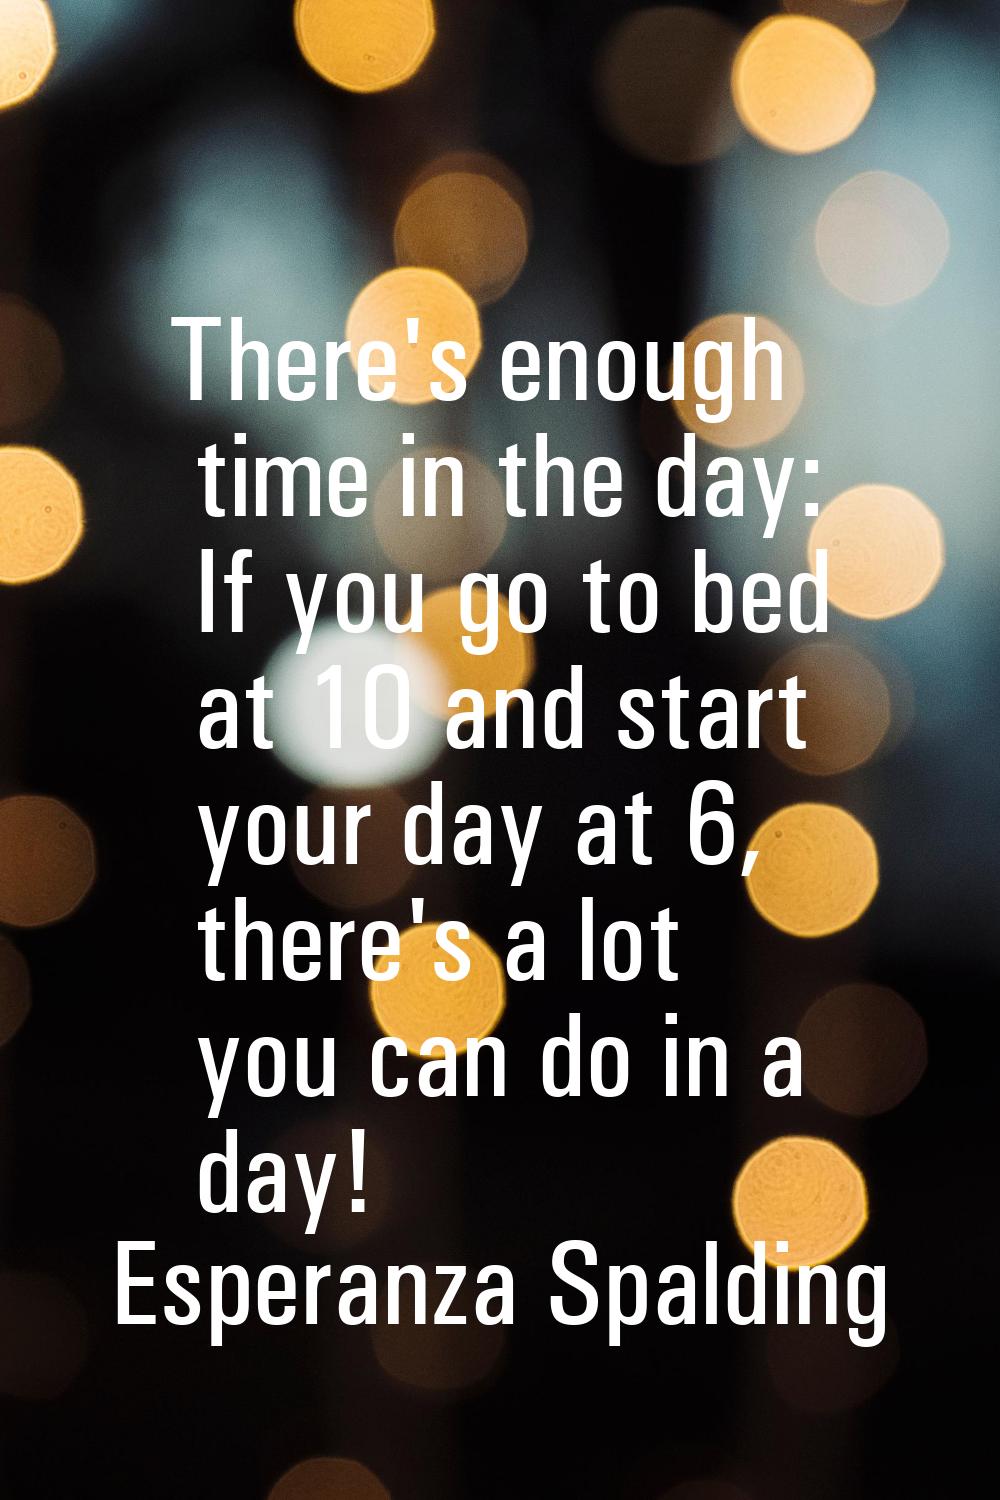 There's enough time in the day: If you go to bed at 10 and start your day at 6, there's a lot you c